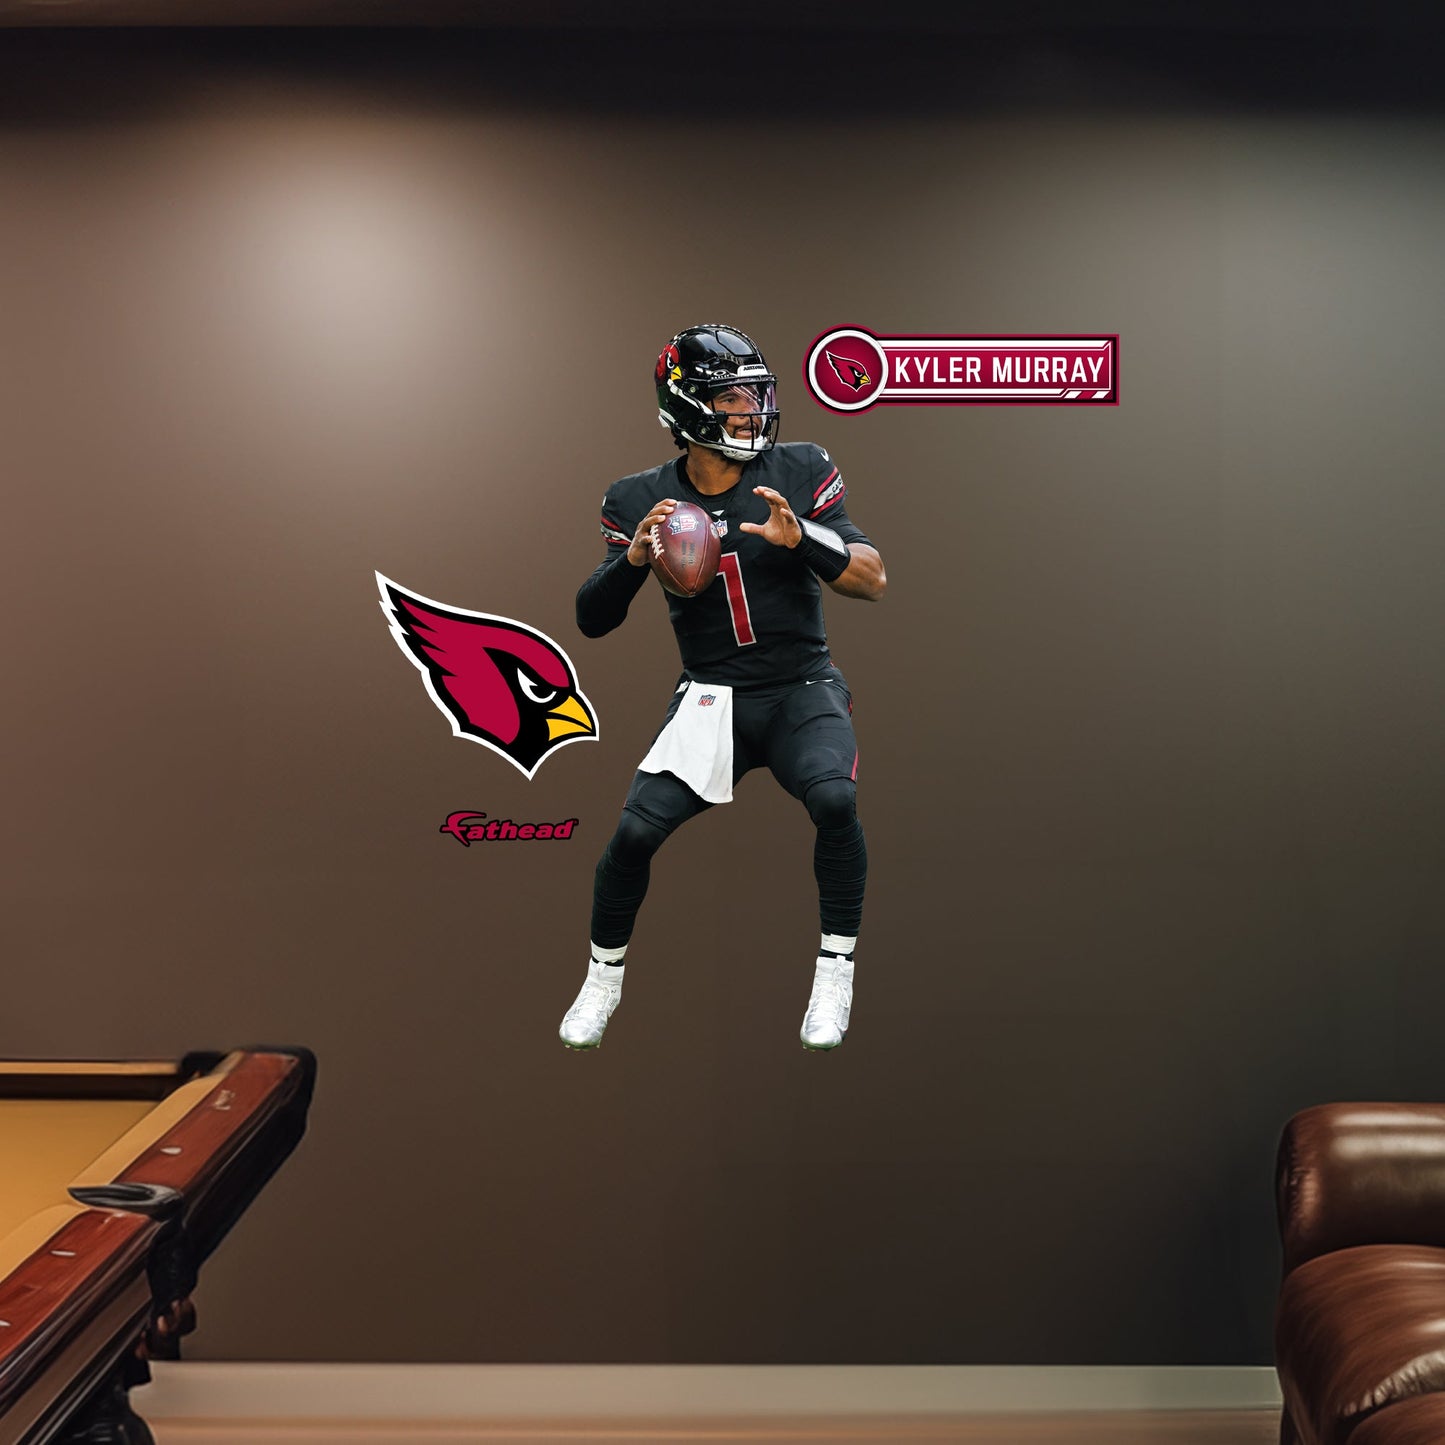 Arizona Cardinals: Kyler Murray Black Jersey        - Officially Licensed NFL Removable     Adhesive Decal